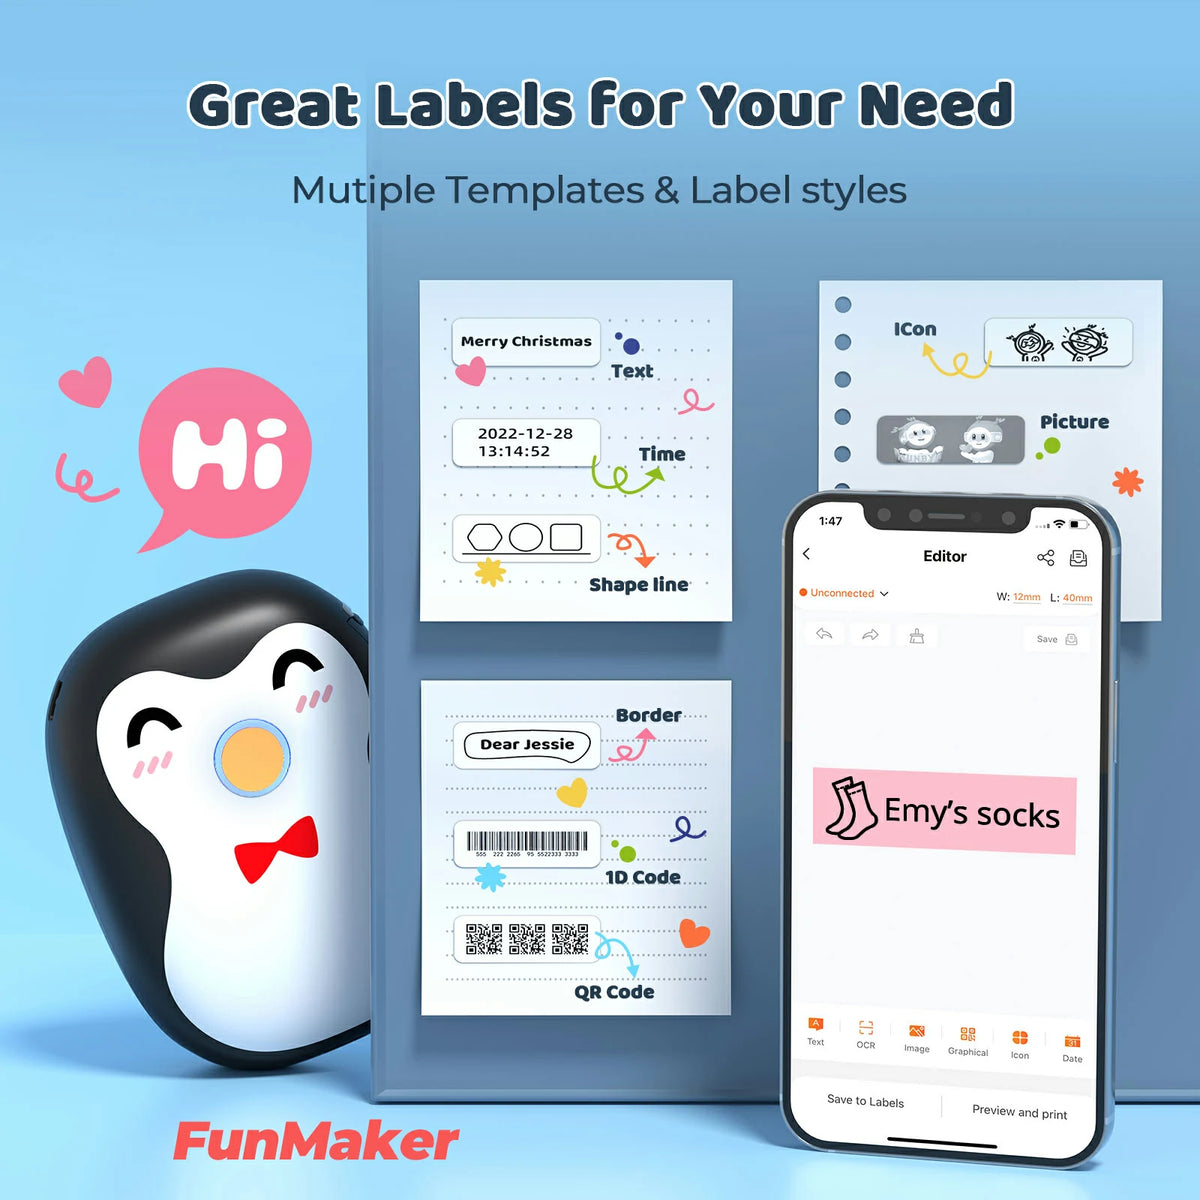 MUNBYN black penguin portable Bluetooth Label Maker Machine has multiple templates and label styles.